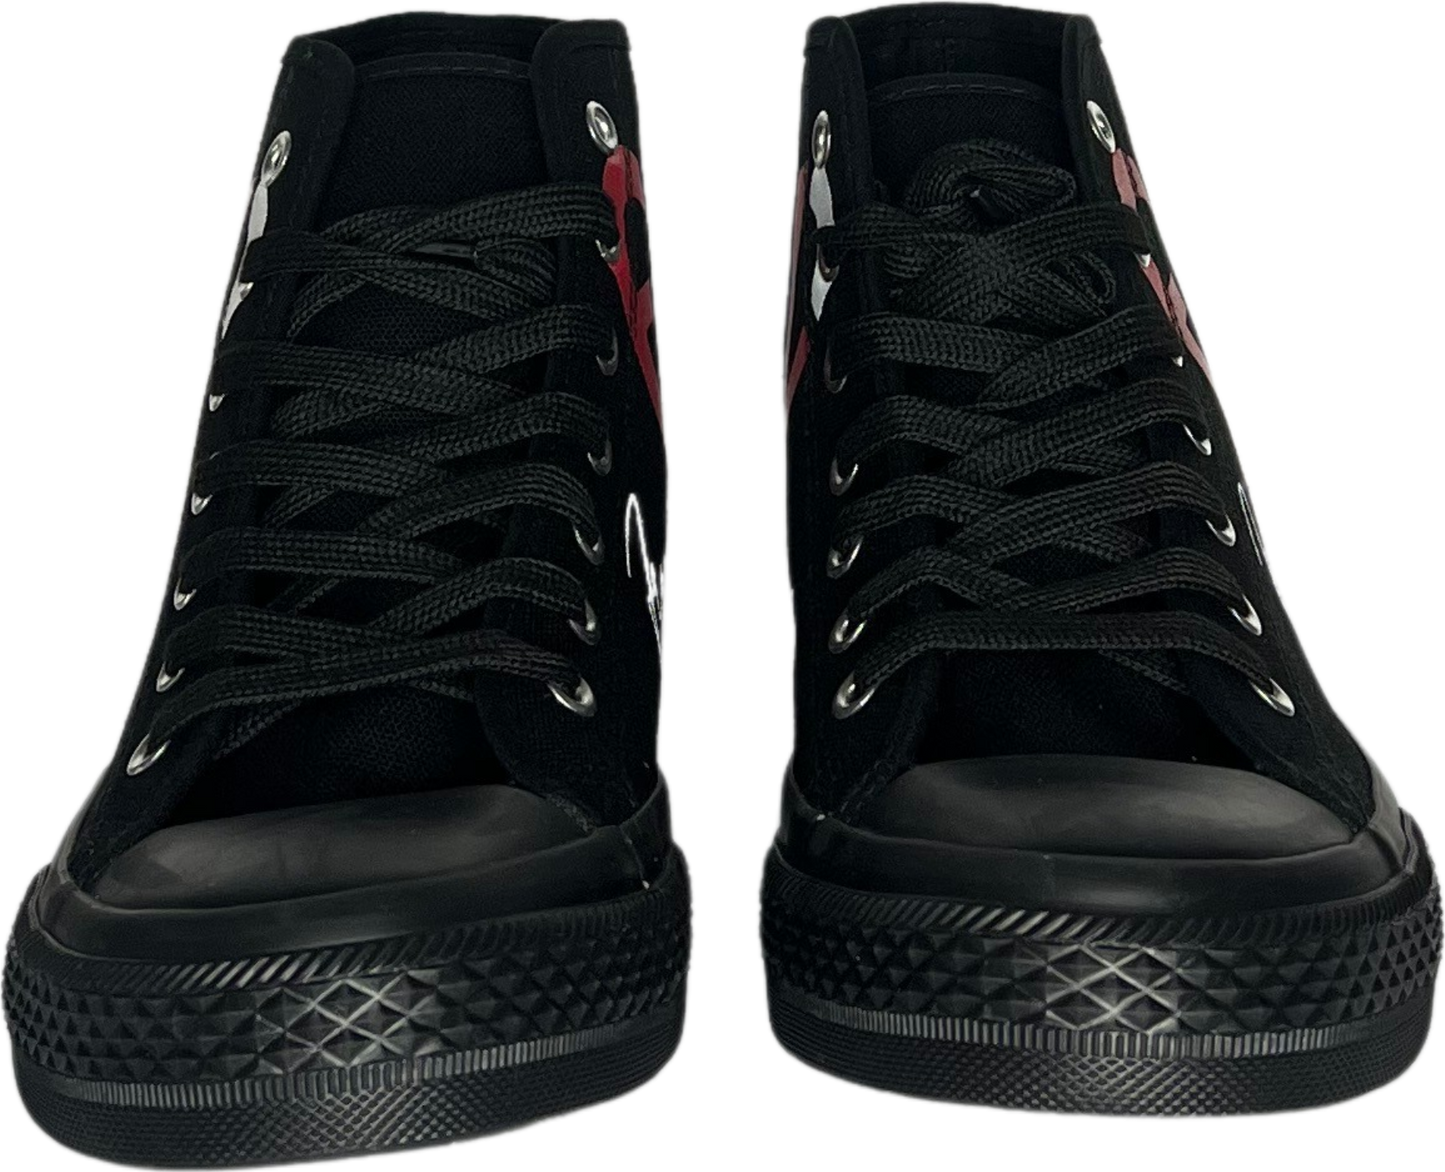 Frantz Lamour Signature Classic Men's High Top Canvas Lace Up Casual Walking Shoes - Black & Red